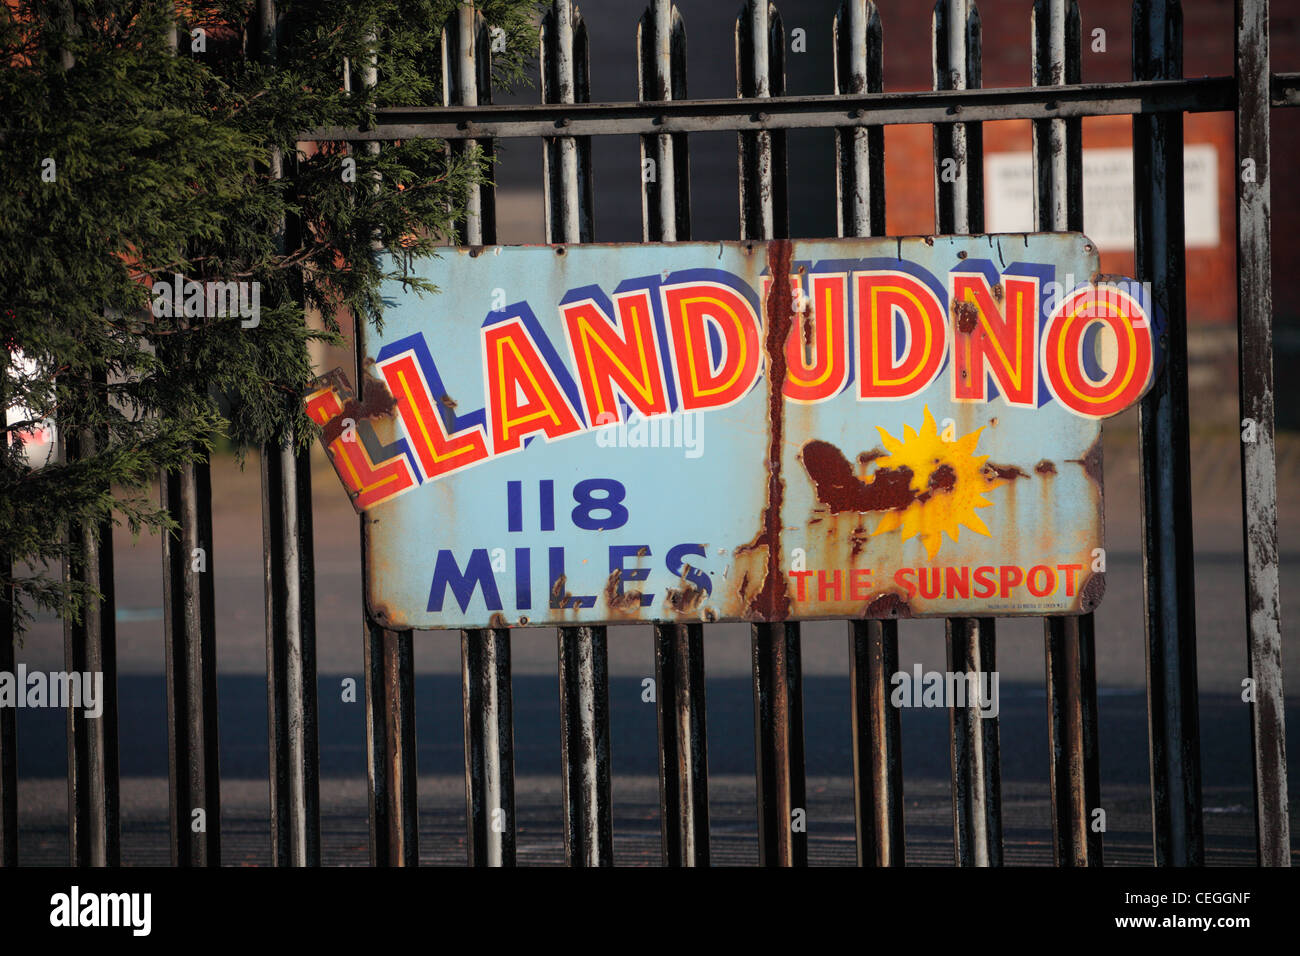 Historic enamel advertising boards which are rusting but still legible Stock Photo